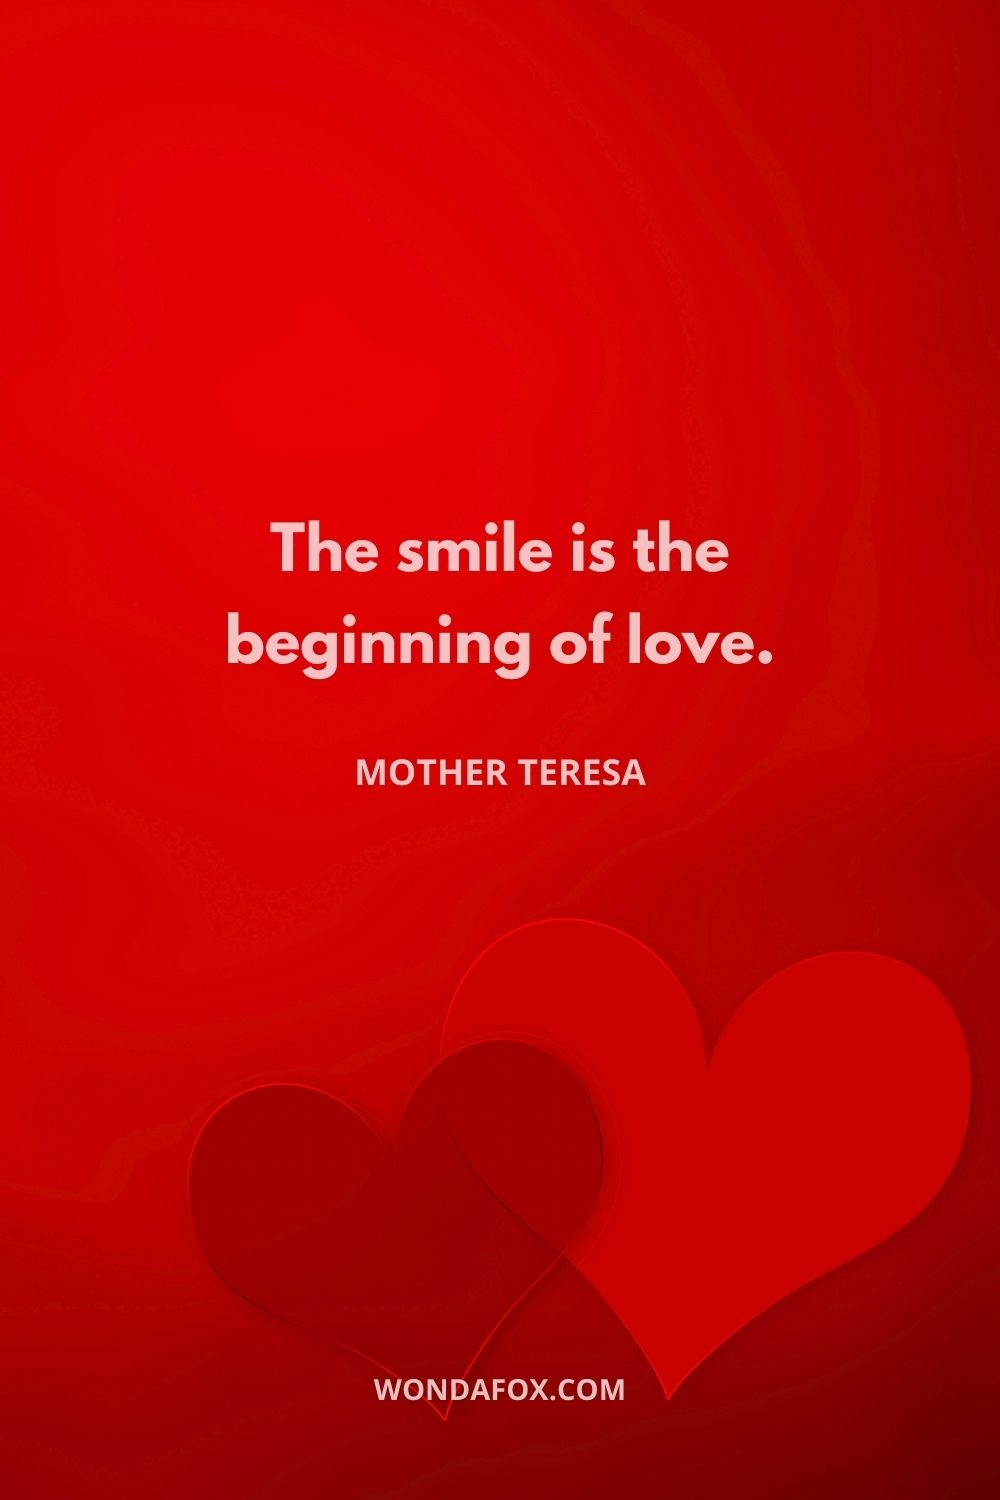 The smile is the beginning of love.